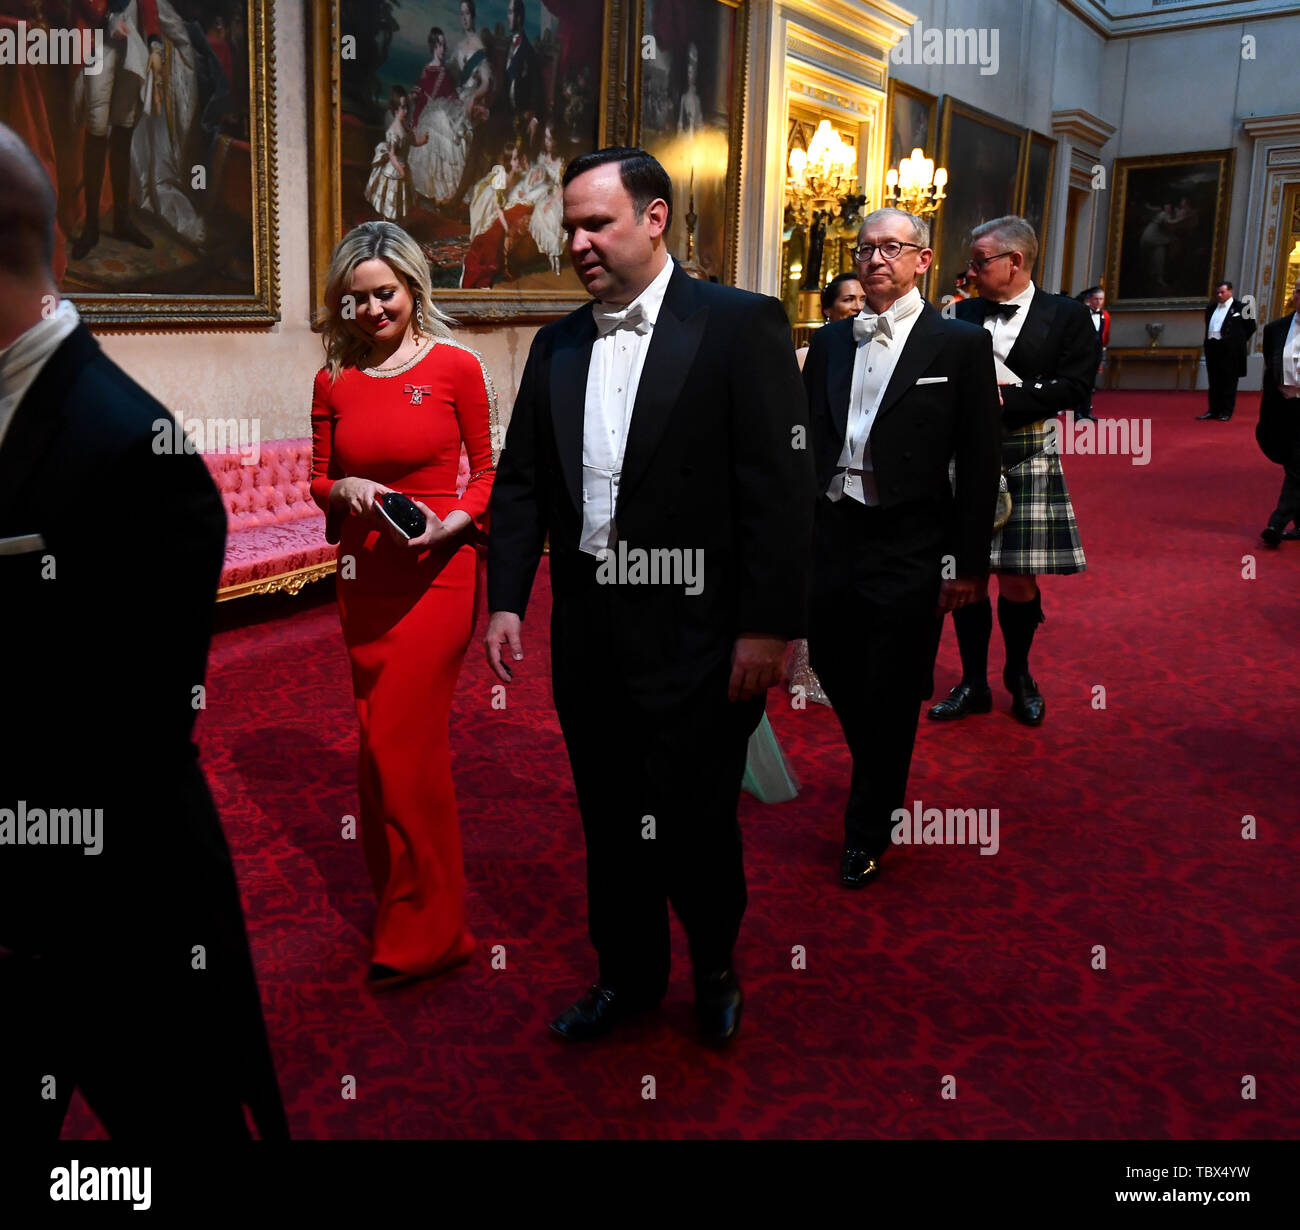 Kathryn Parsons and Daniel Scavino arrive through the East Gallery during the State Banquet at Buckingham Palace, London, on day one of the US President's three day state visit to the UK. Stock Photo